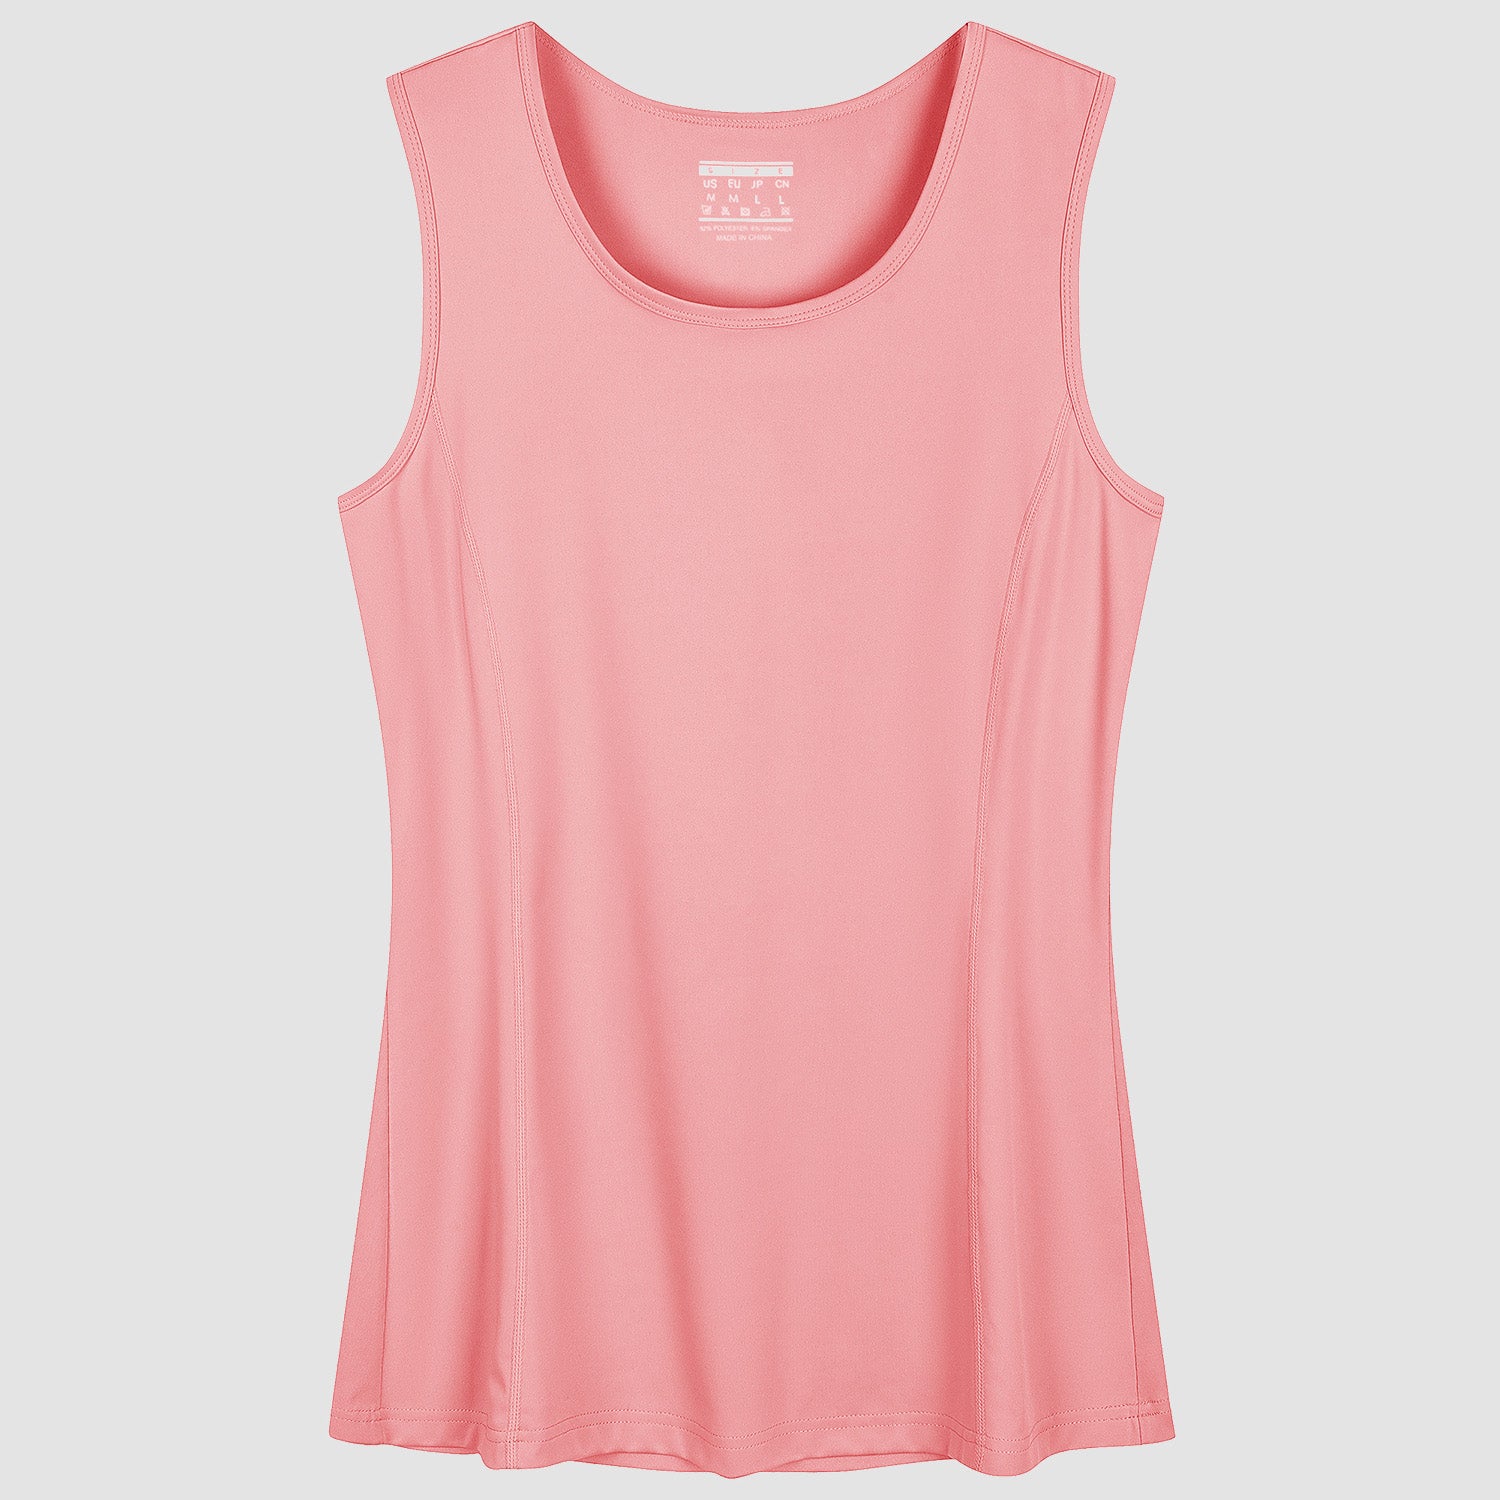 Women's Workout Shirts & Tops in Pink